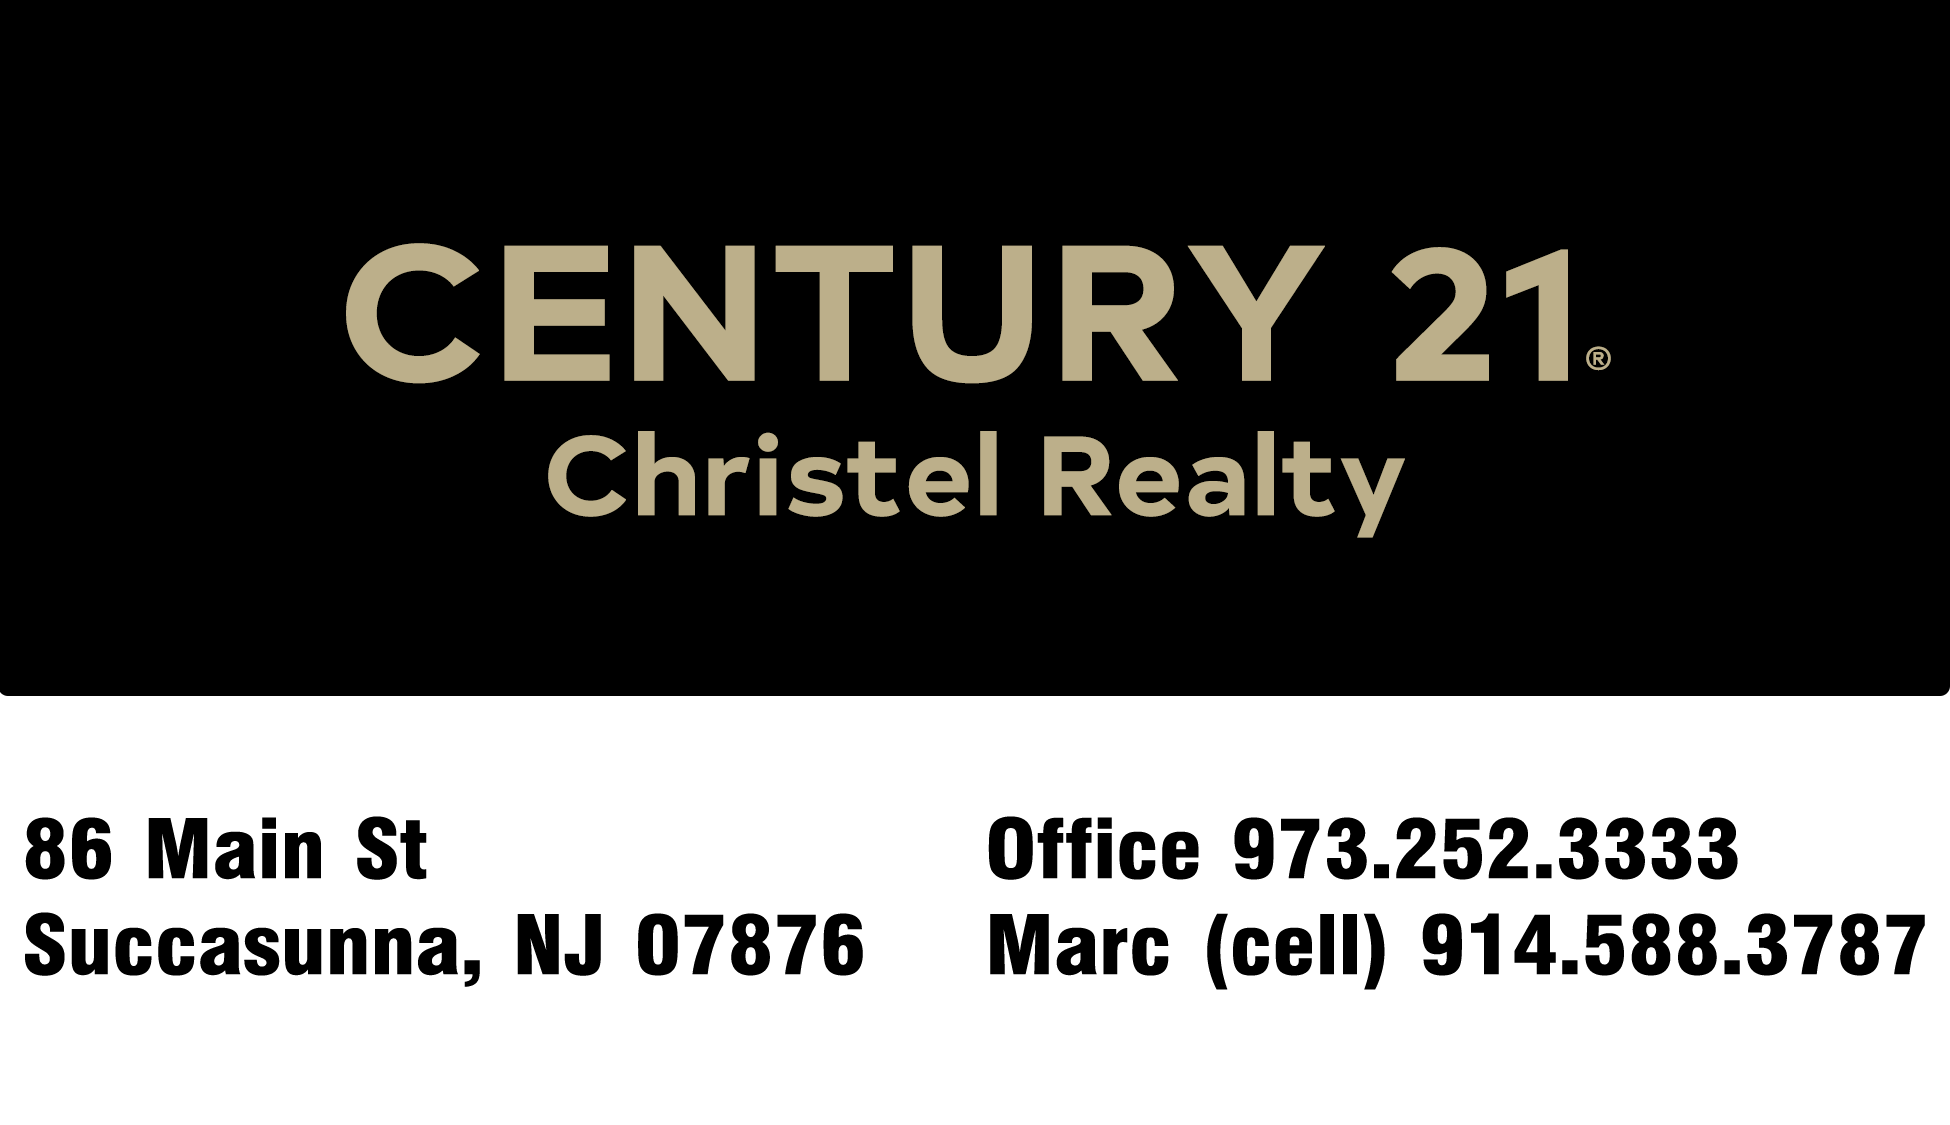 Century 21 Professional Realty in Succasunna. We specialize in Poets Peak and Hunter's Ridge!